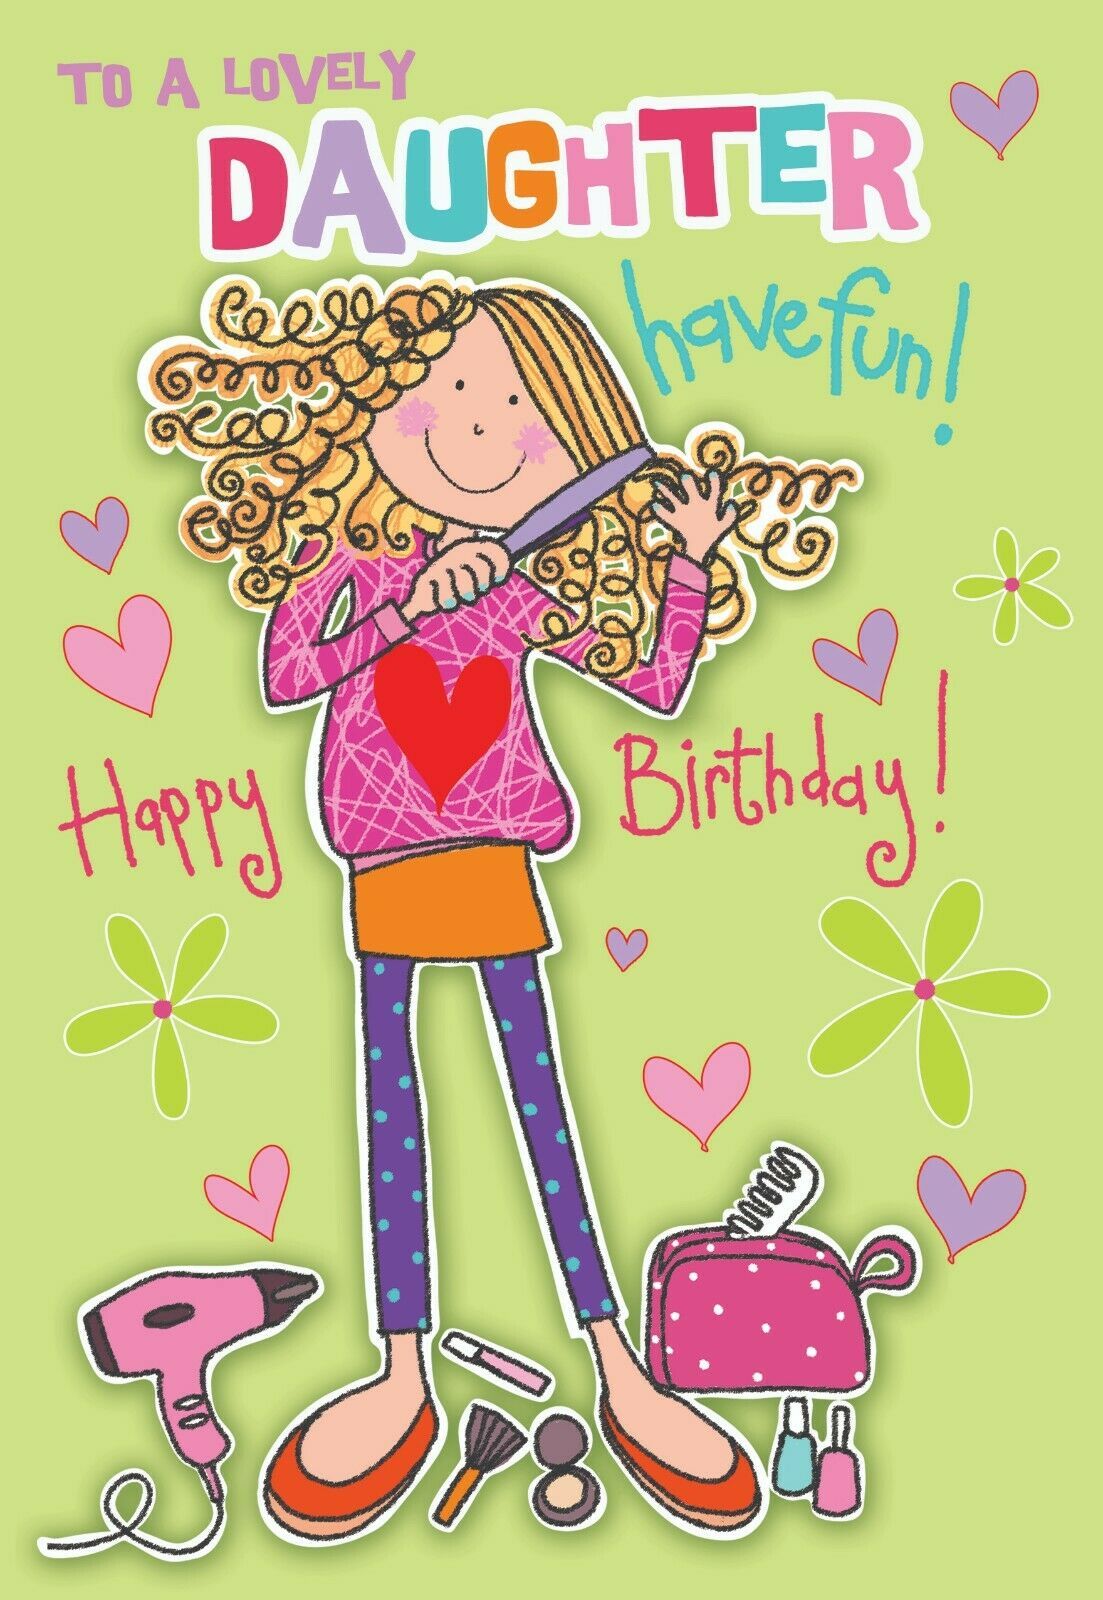 SUPER SPARKLY Daughter BIRTHDAY Card ~ Cherry Orchard Publishing ...